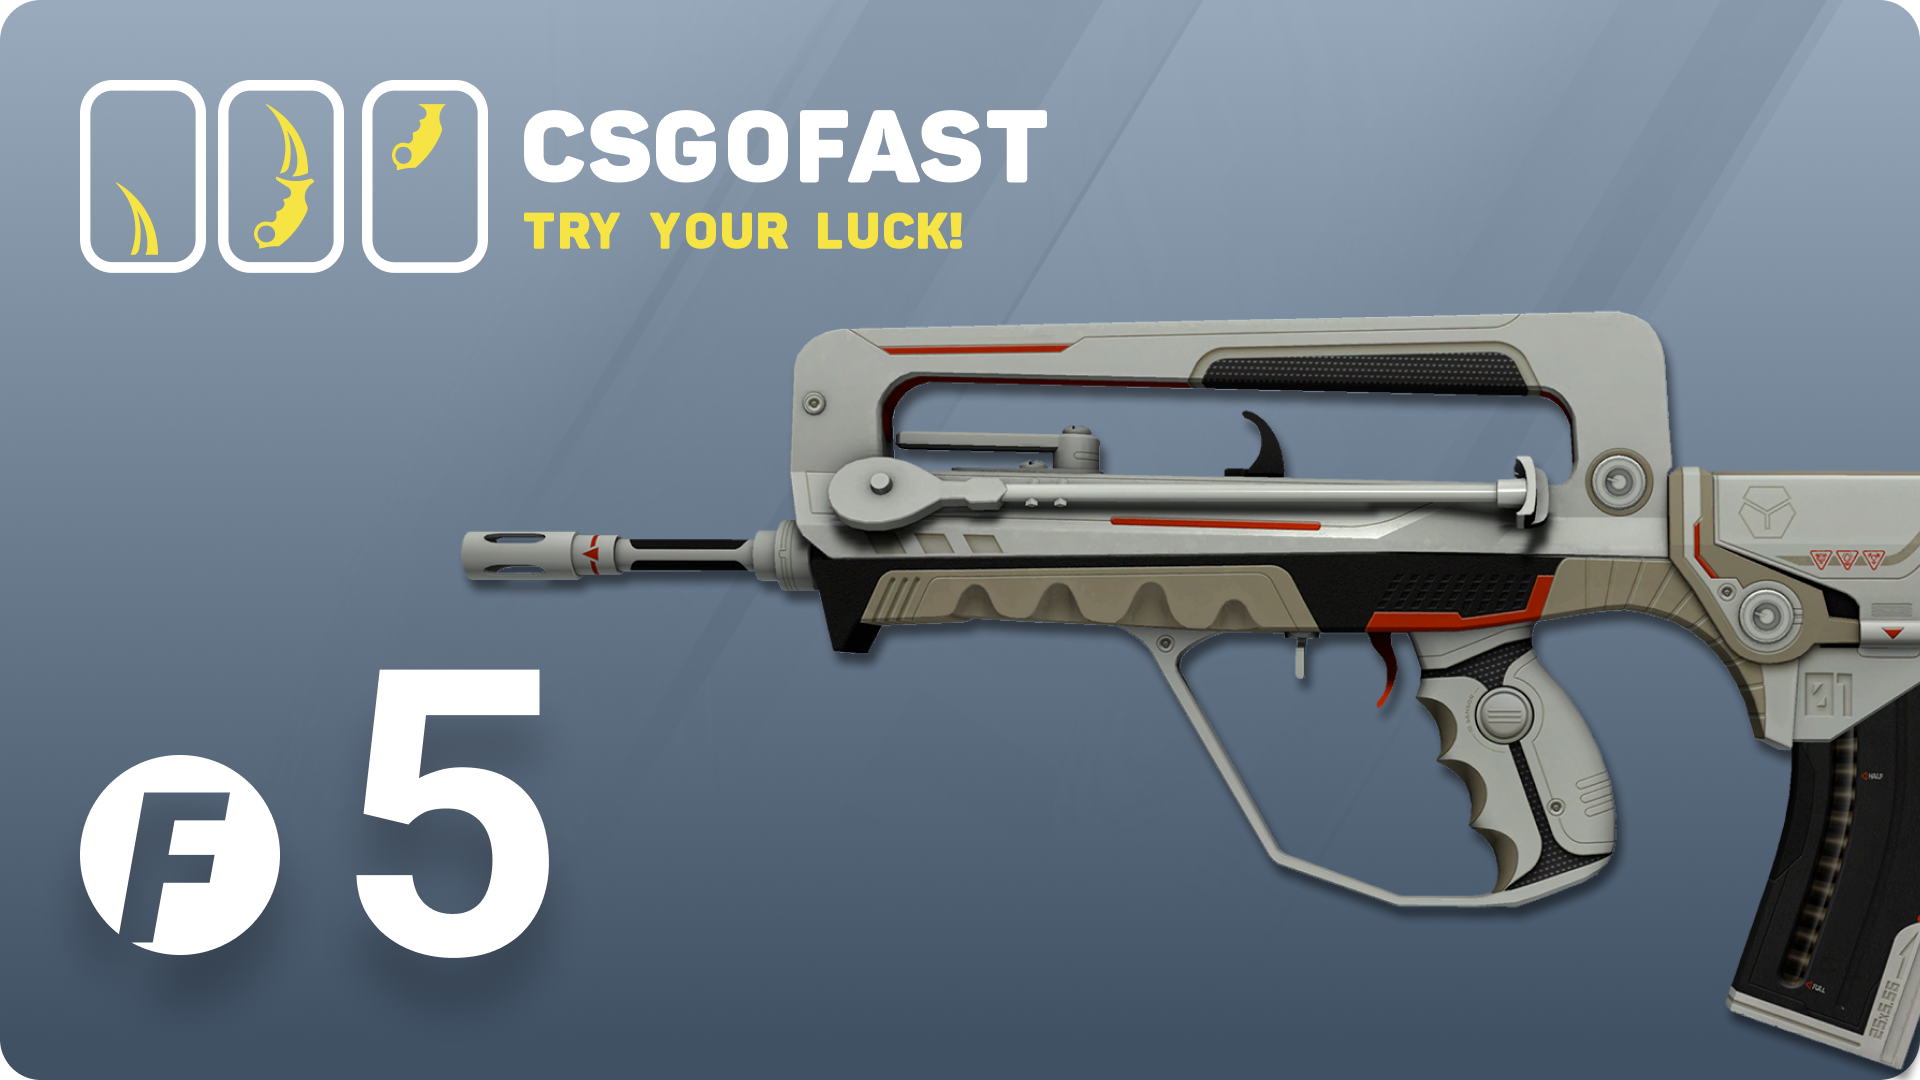 CSGOFAST 5 Fast Coins Gift Card, $3.63